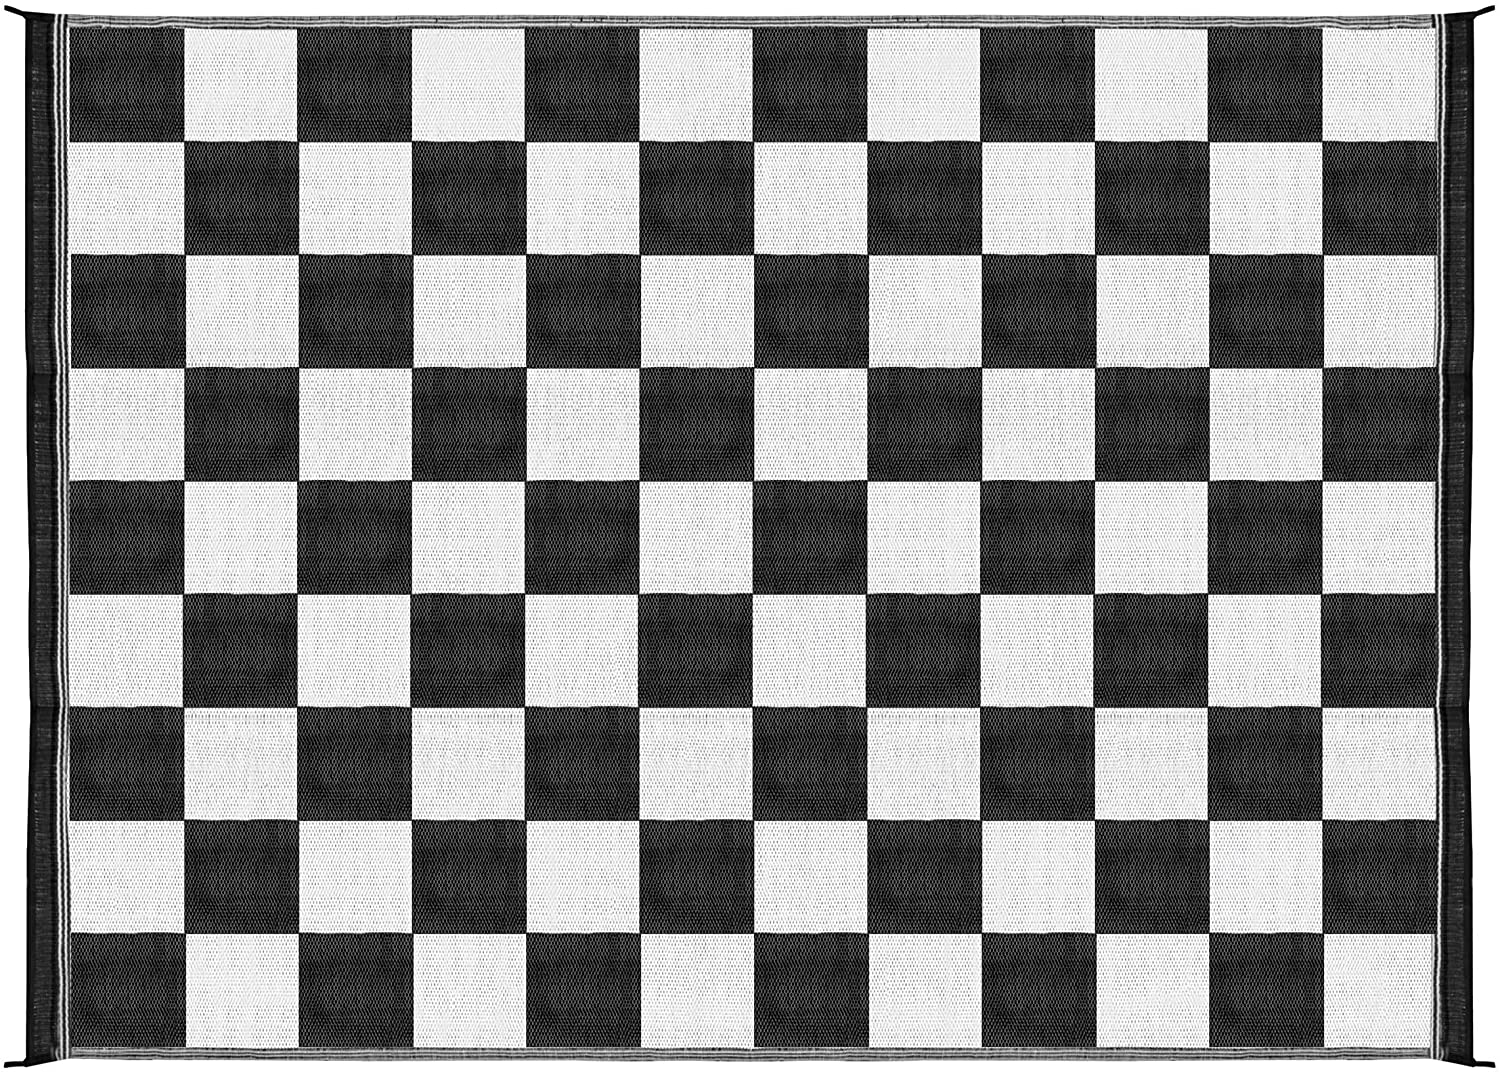 Camco 42822 Outdoor RV Awning Mat with Storage Bag, 9-Feet x 12-Feet - The Perfect Outdoor Accessory with Multiple Uses - Bonus Storage Bag Included - Checkered, Black/White Print